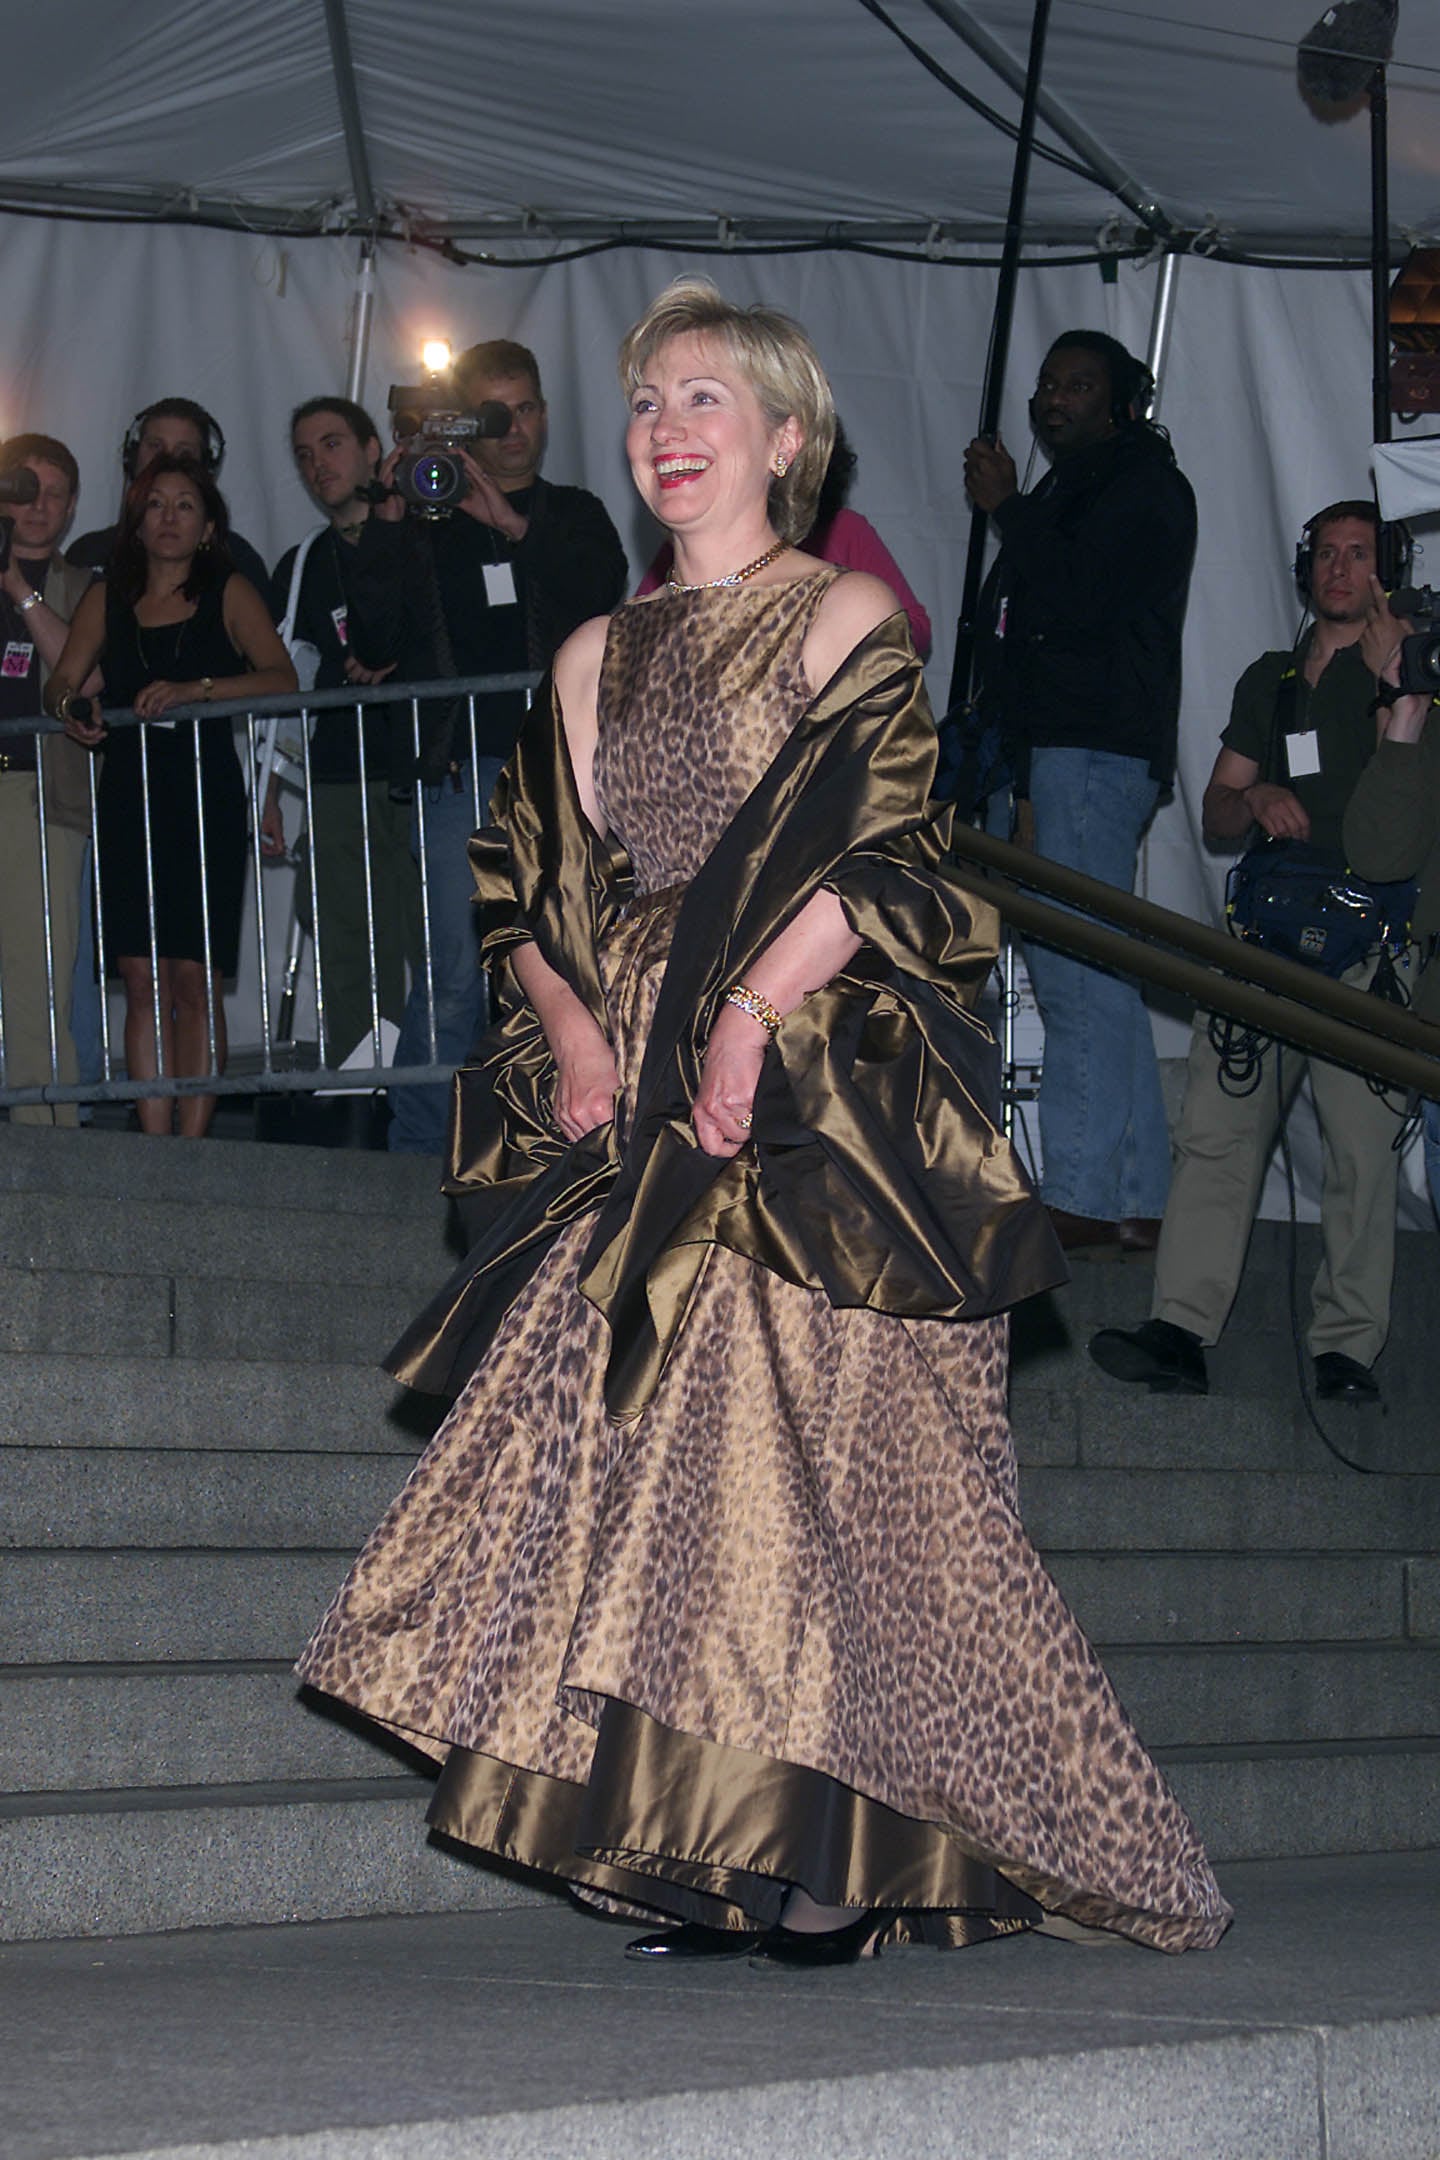 Sen. Hillary Clinton at the Metropolitan Museum's Costume Institute Gala for the opening of 'Jacqueline Kennedy: The White House Years' at the Metropolitan Museum of Art in New York City. 04/23/2001. Photo: Evan Agostini/Getty Images